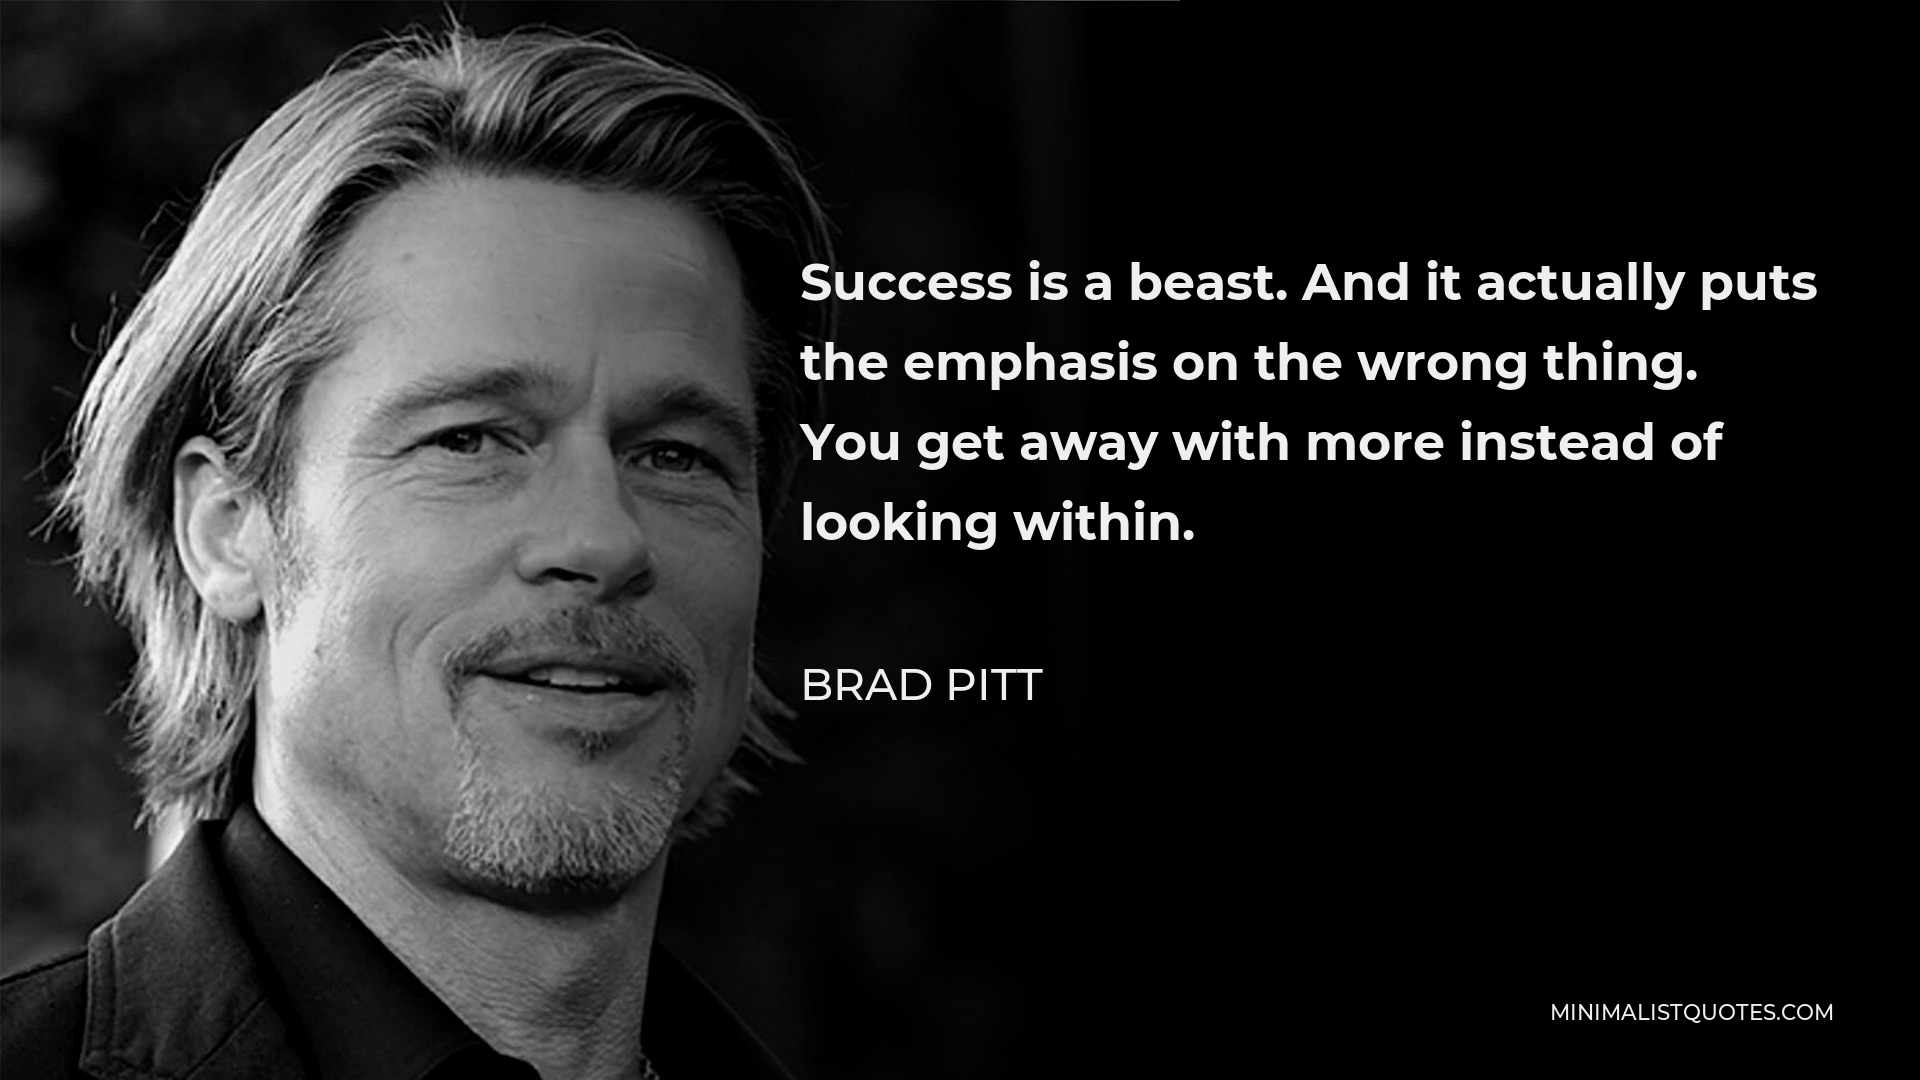 Brad Pitt Quote - Success is a beast. And it actually puts the emphasis on the wrong thing. You get away with more instead of looking within.